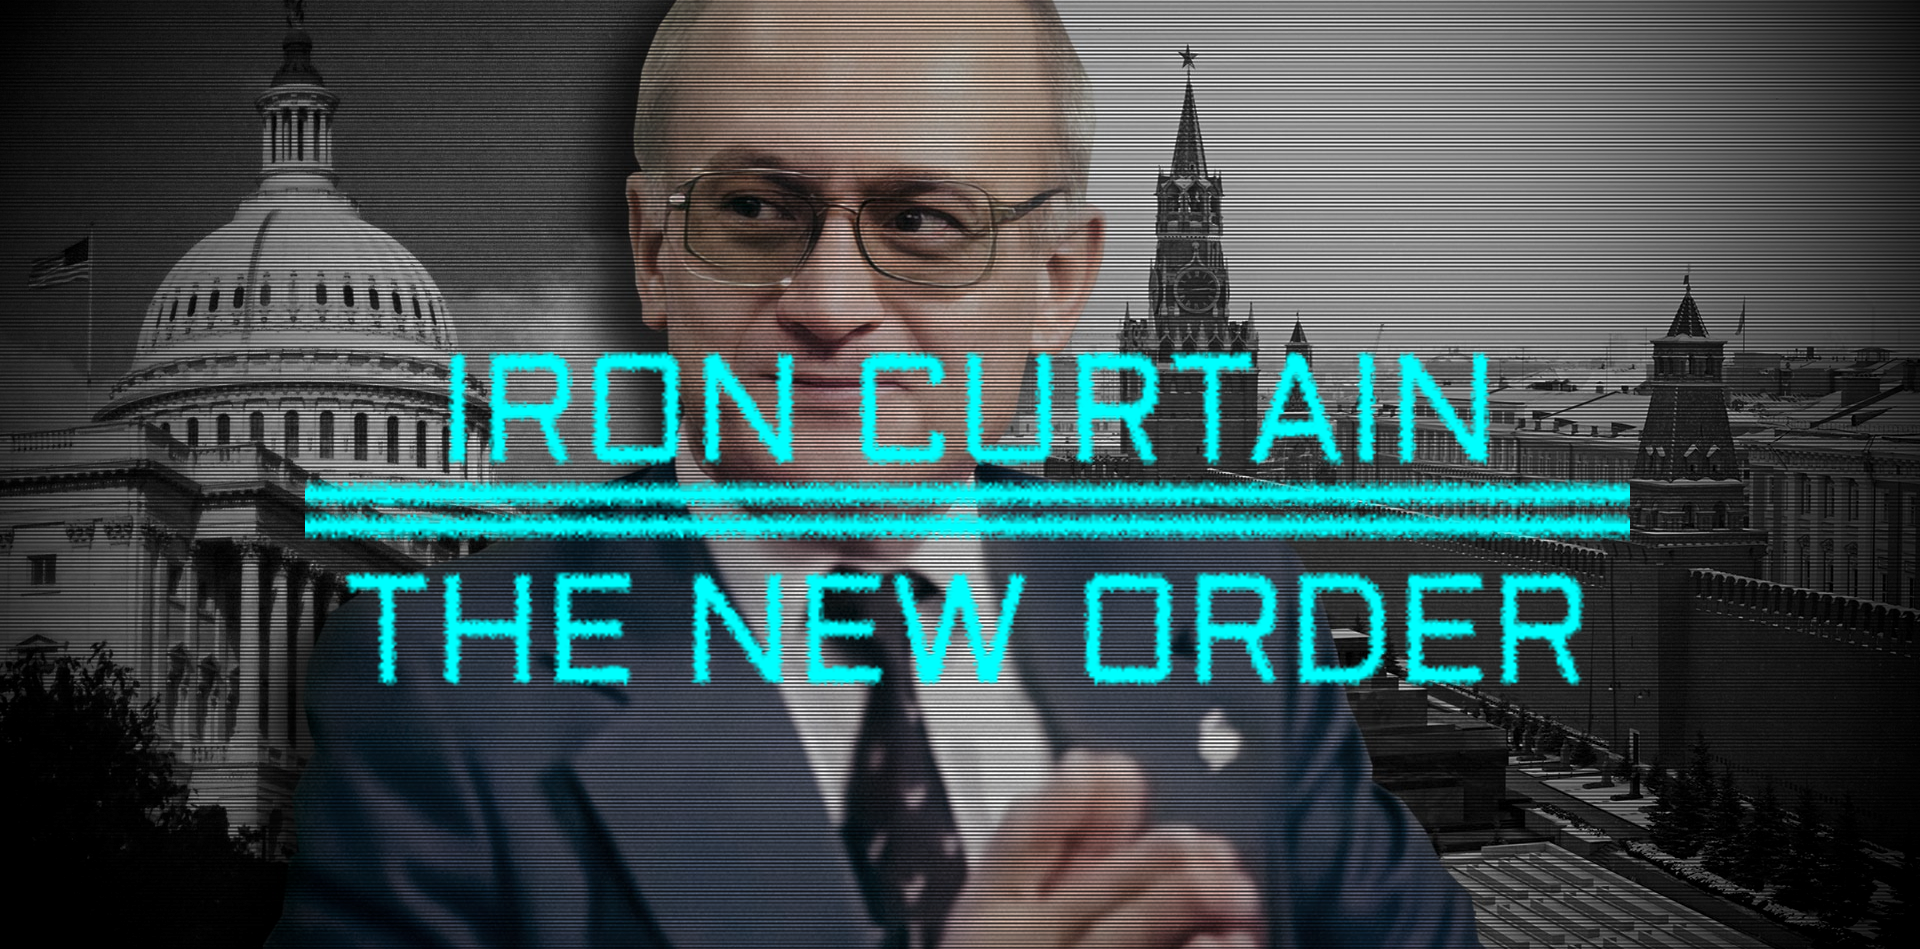 IRON CURTAIN - THE NEW ORDER